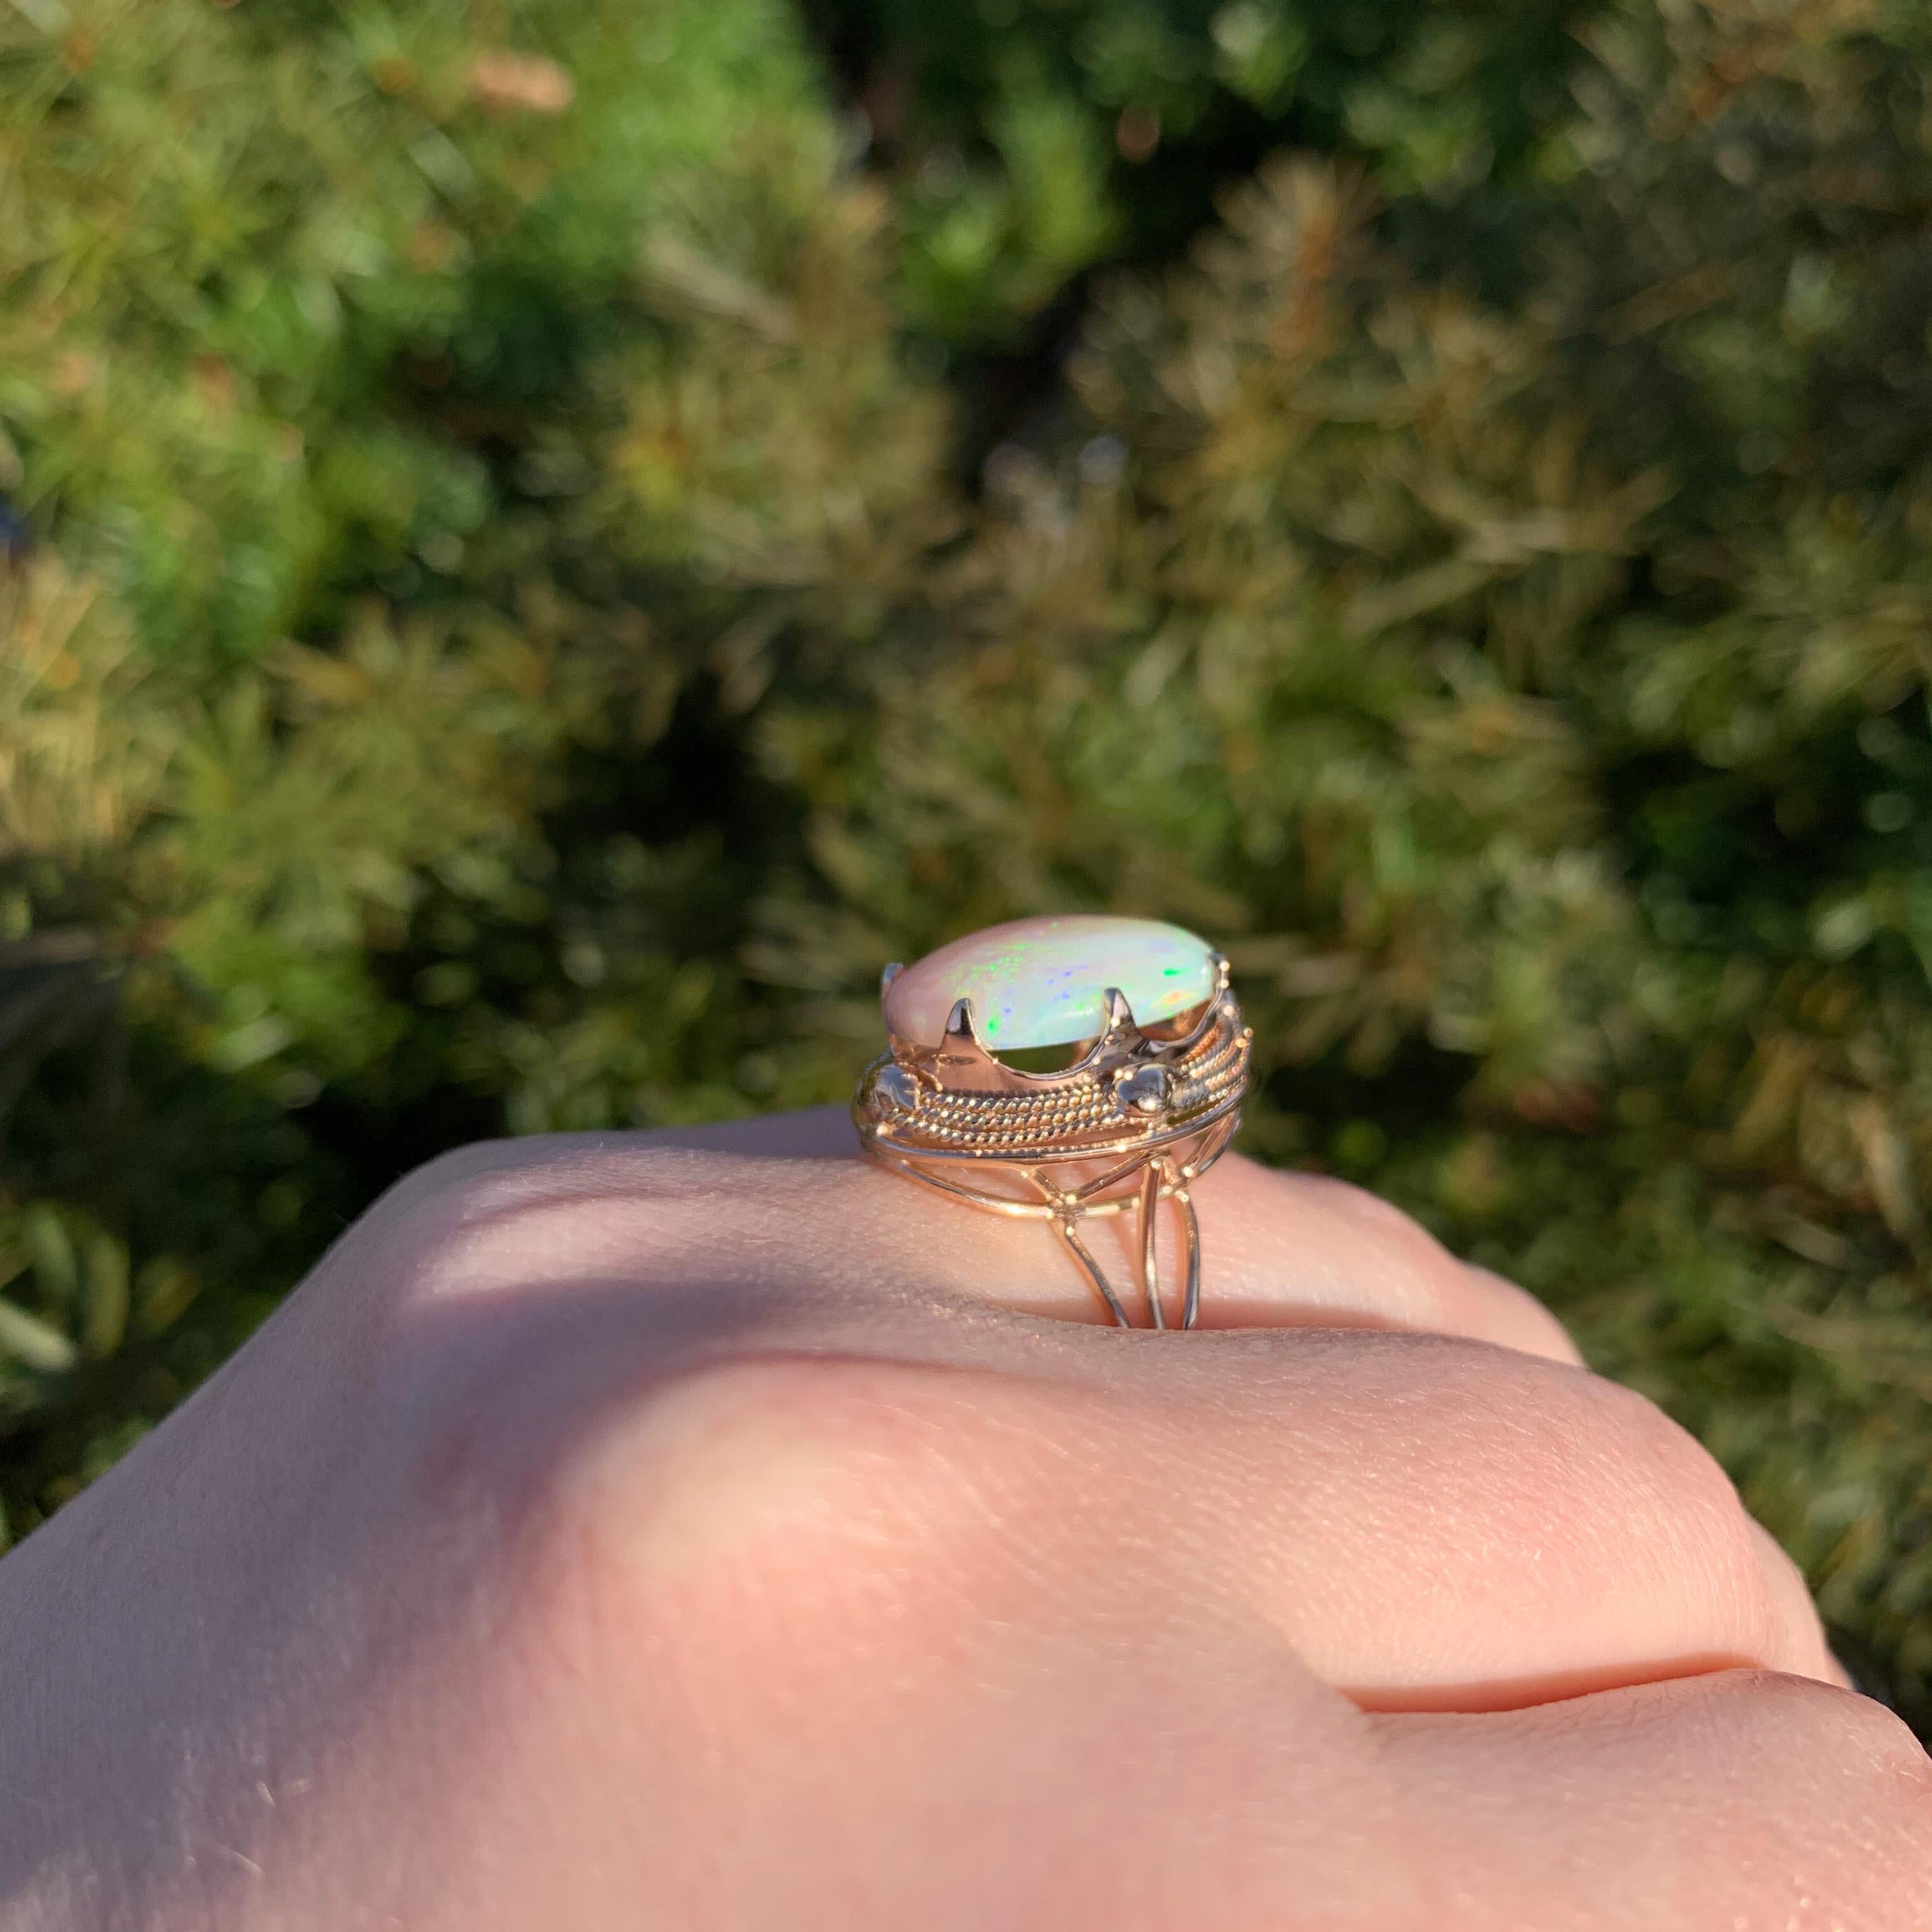 14K Rose Gold Hand Wrought Ring with a large 6.05 carat Australian Opal For Sale 3